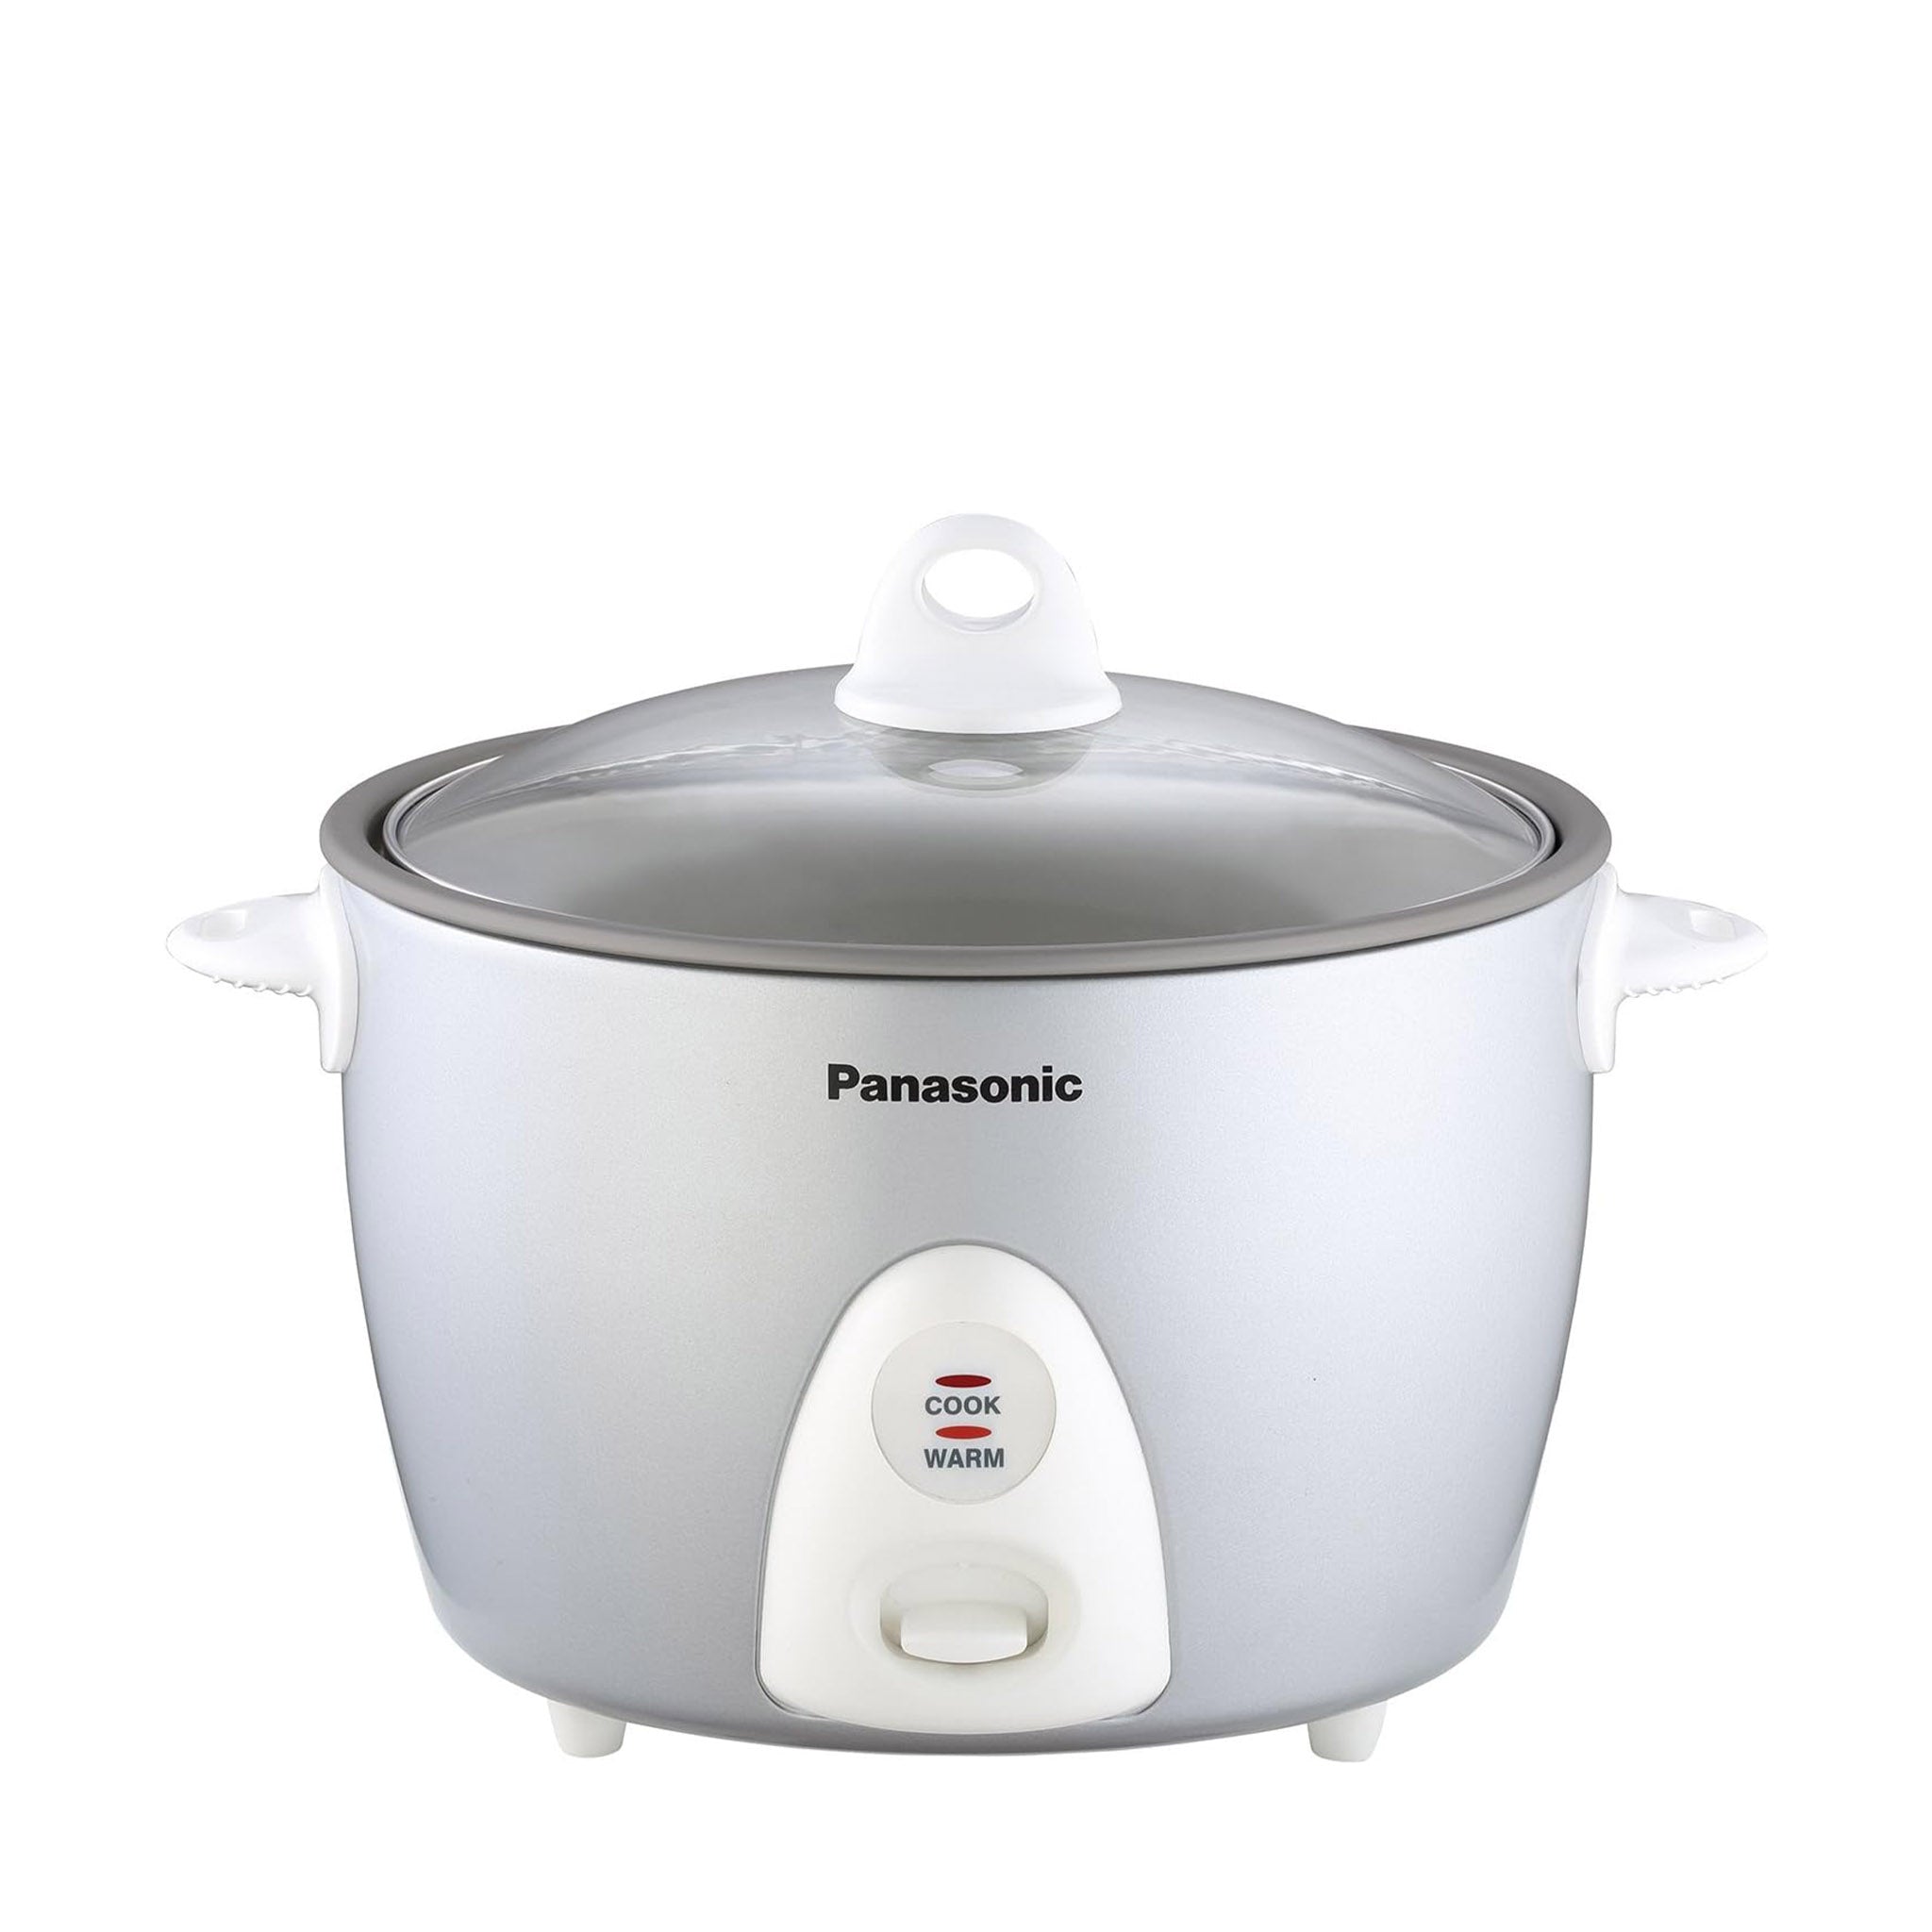 Rice/Grain Cooker - 5 Cup Uncooked Rice Capacity